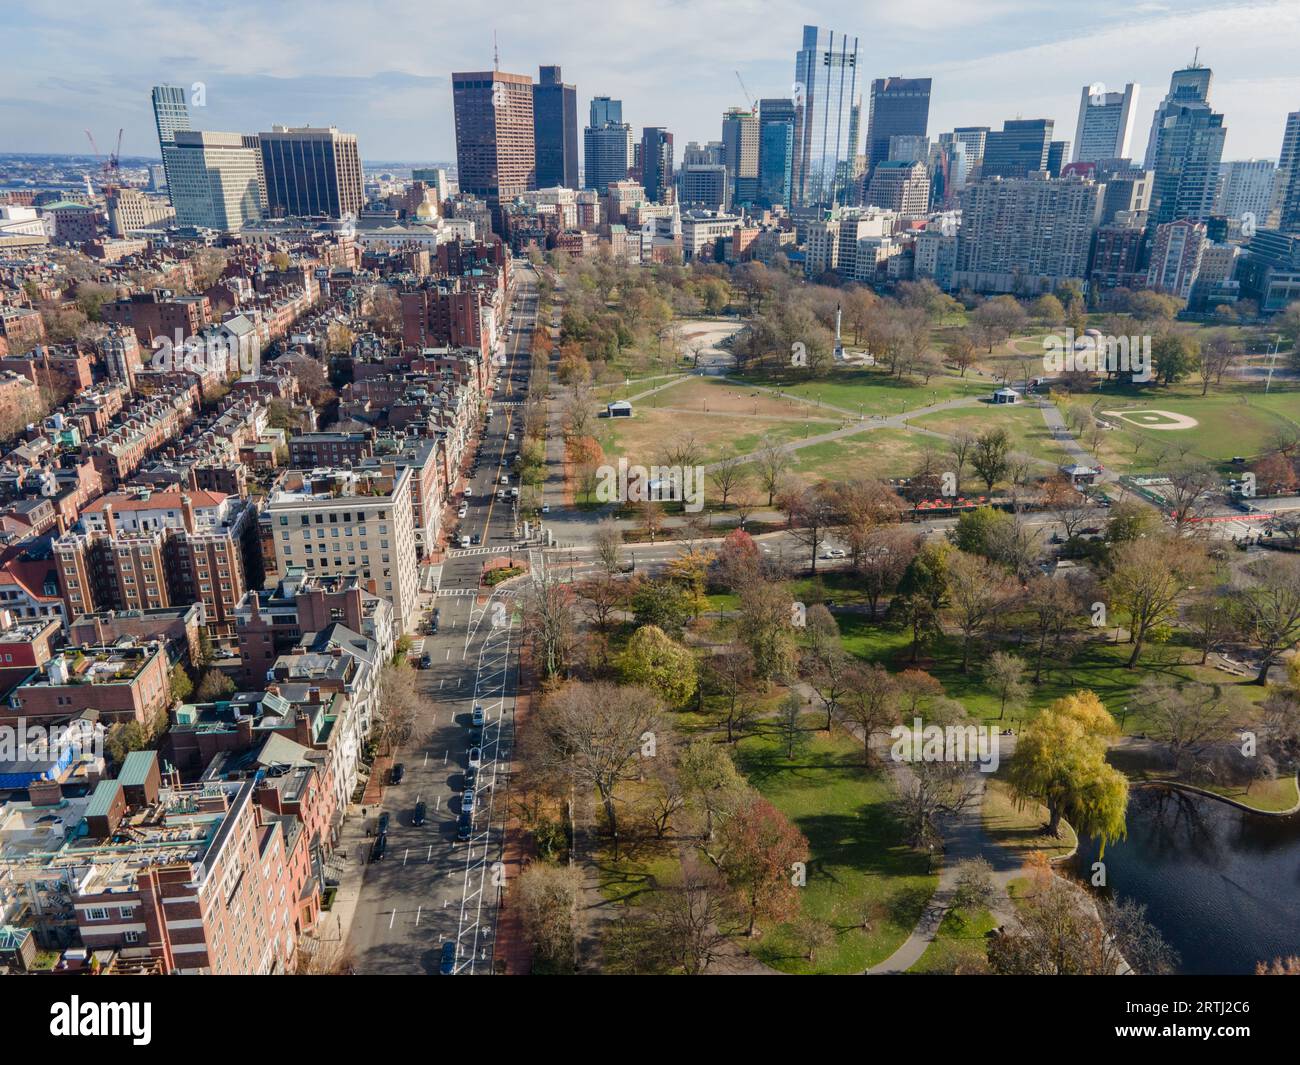 Aerial view of Beacon Street, Beacon Hill, Boston Common and Public Garden with the downtown skyline in the background Stock Photo